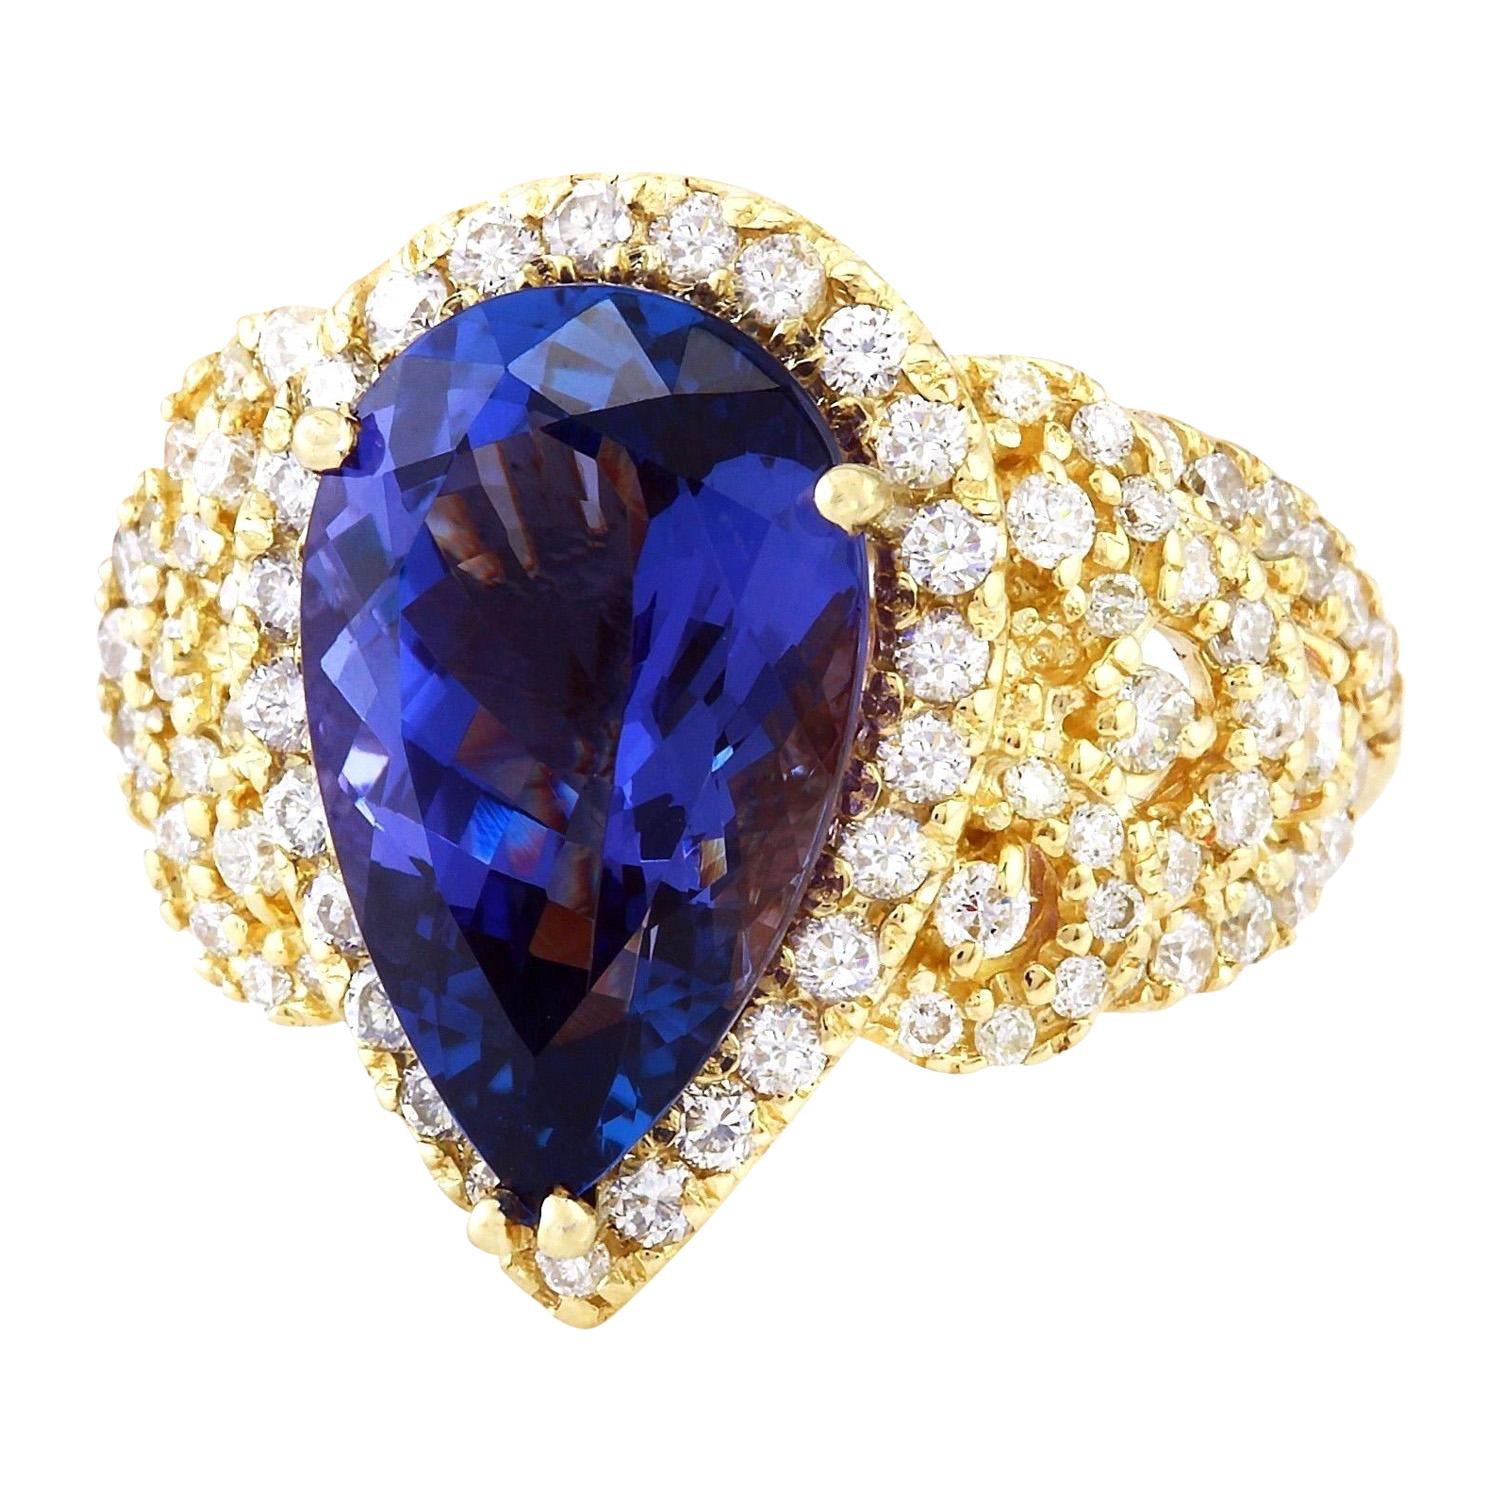 7.73 Carat  Tanzanite 18K Solid Yellow Gold Diamond Ring
Item Type: Ring
Item Style: Cocktail
Material: 18K Yellow Gold
Mainstone: Tanzanite
Stone Color: Blue
Stone Weight: 5.73 Carat
Stone Shape: Pear
Stone Quantity: 1
Stone Dimensions: 16.05x9.65